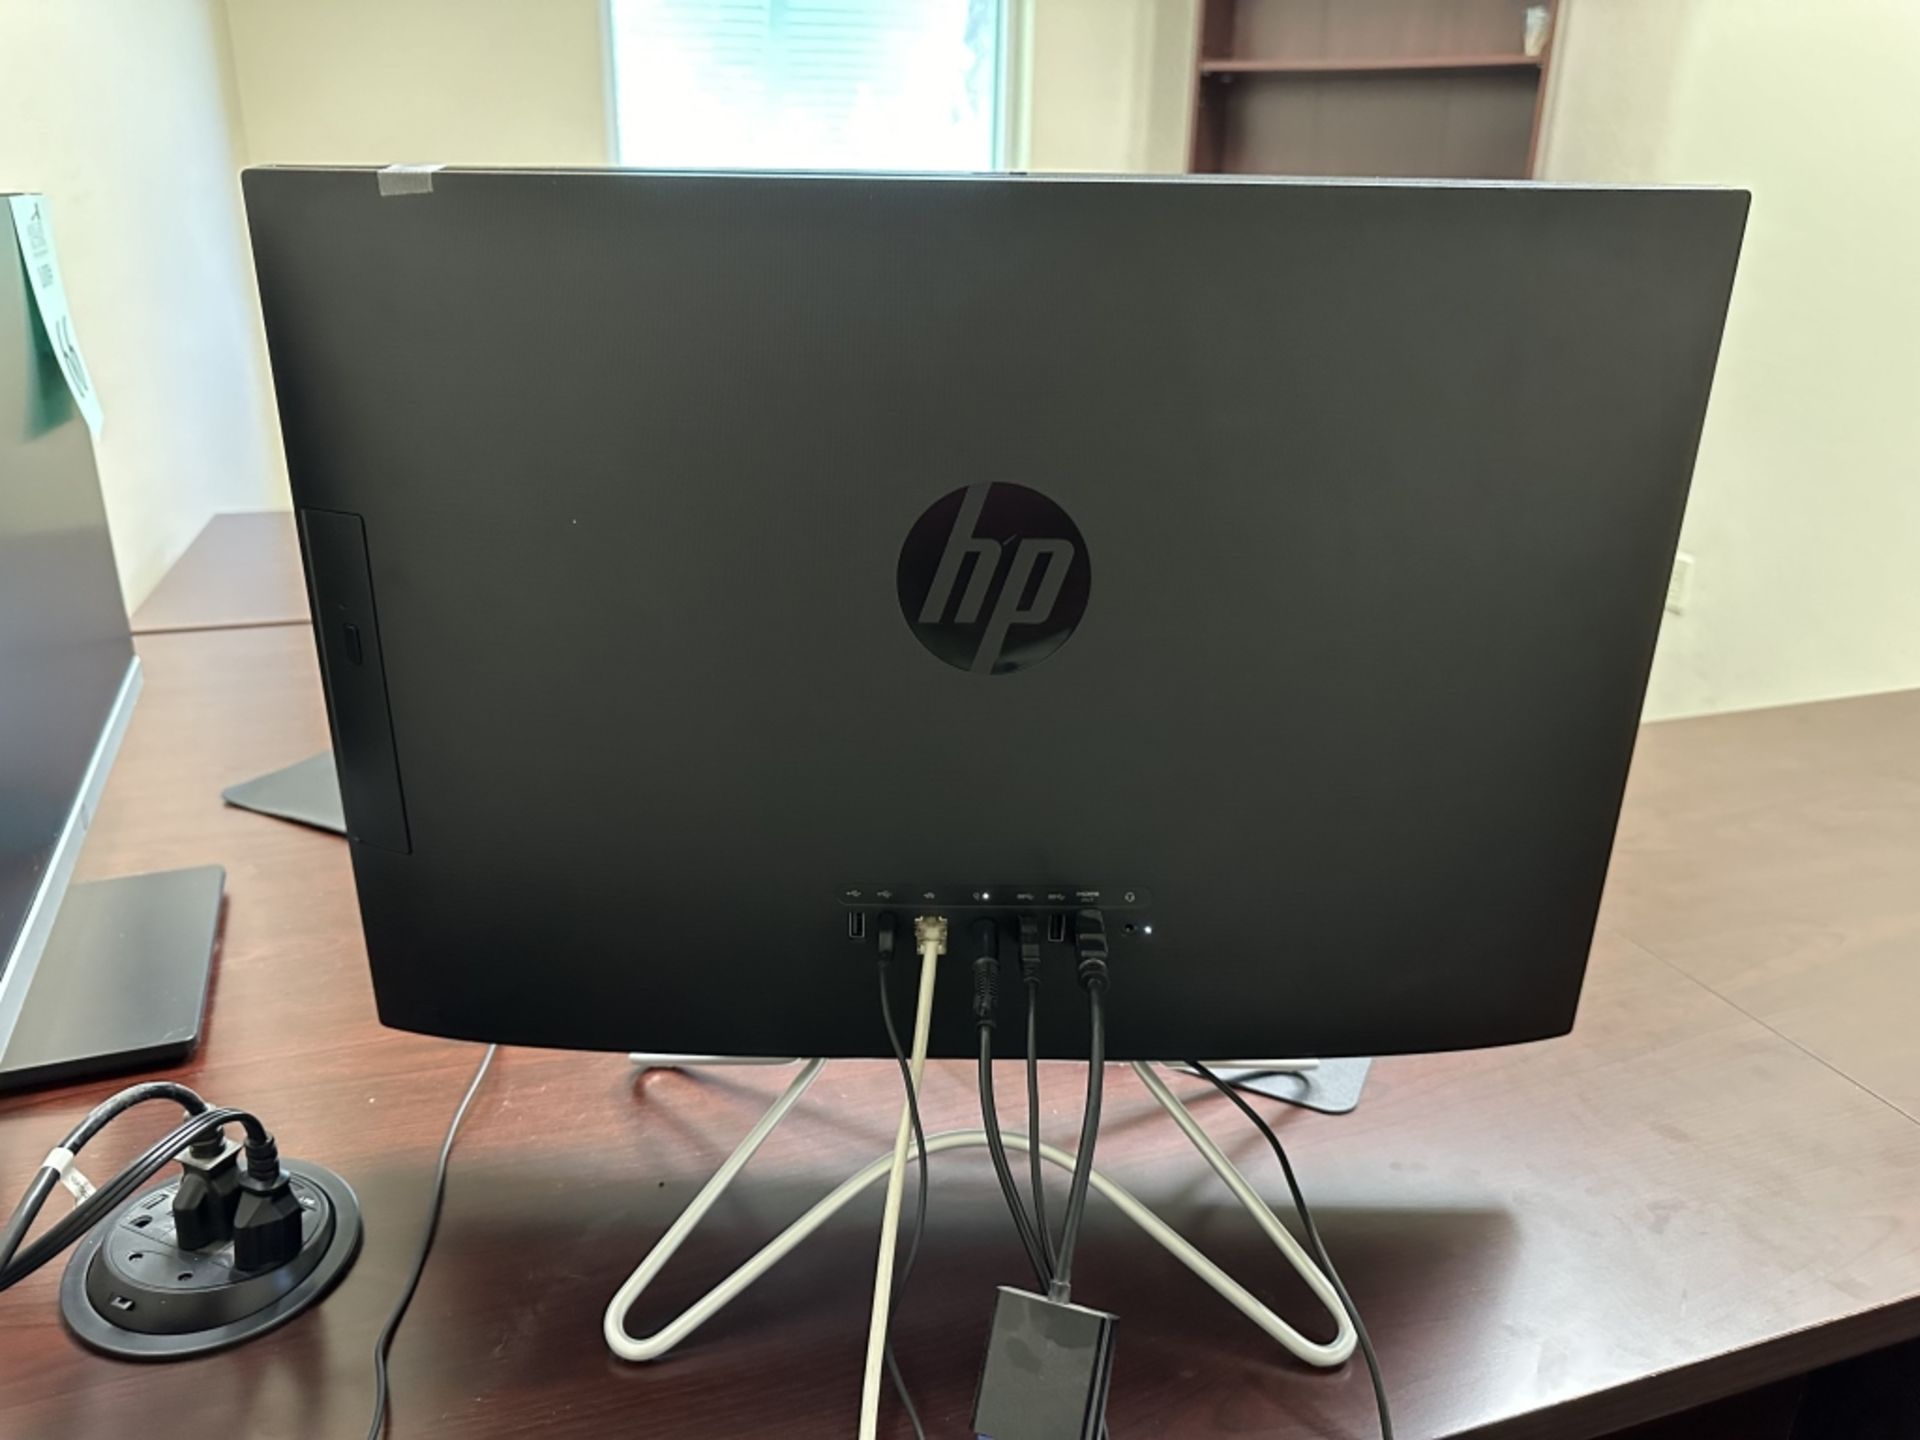 HEWLETT PACKARD 24" ALL-IN-ONE COMPUTER SYSTEM - Image 2 of 3